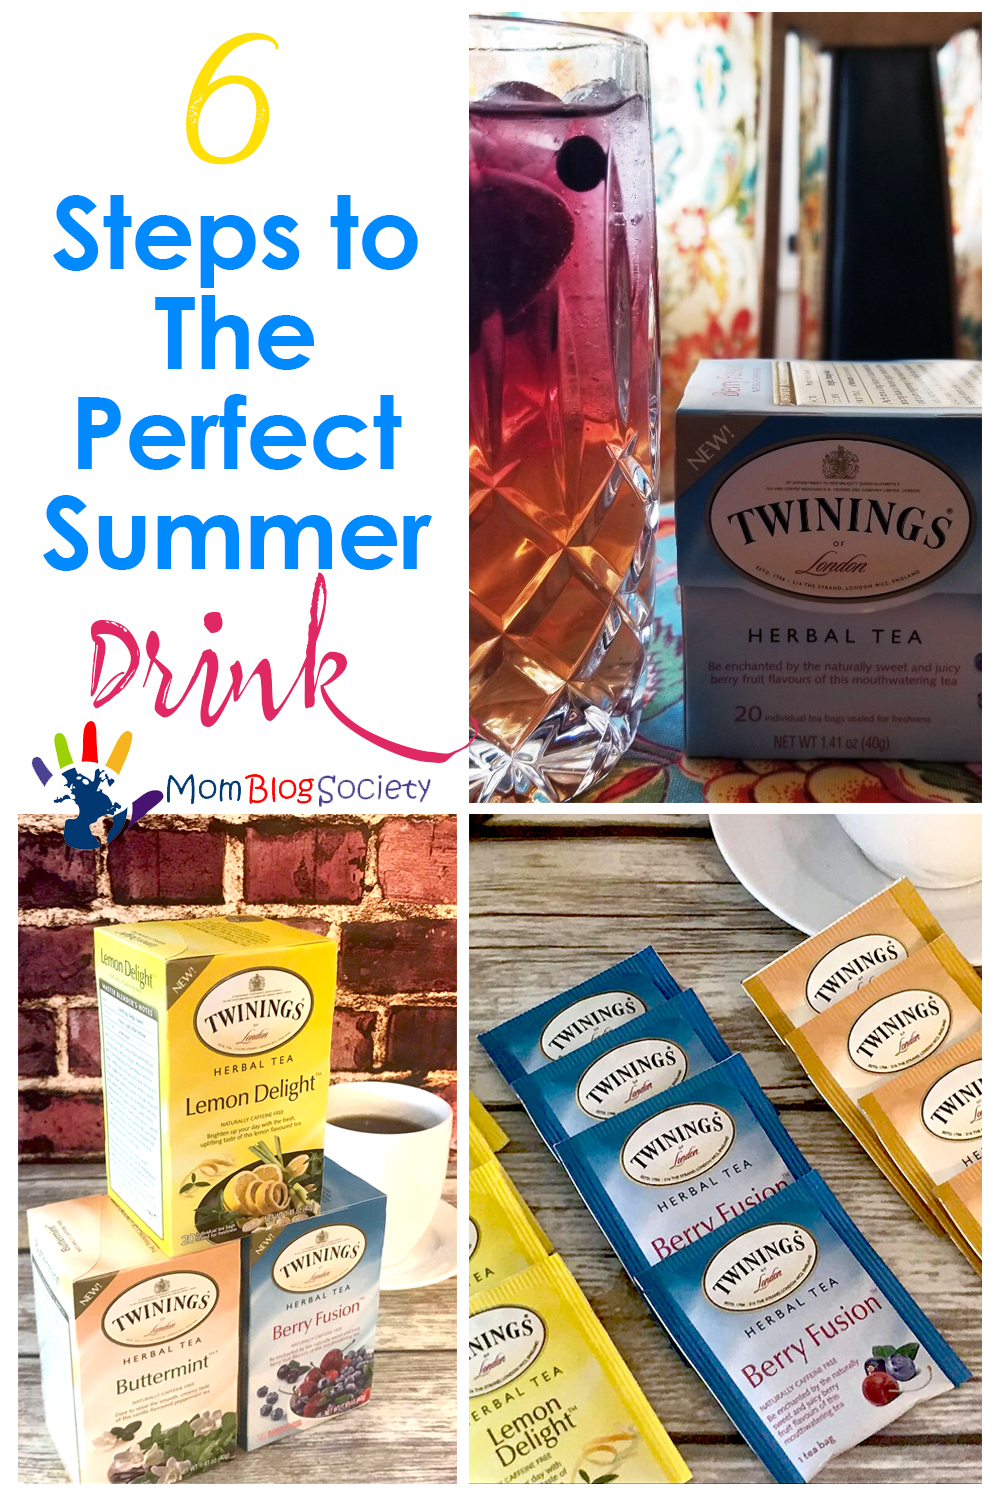 6 Steps to The Perfect Summer Drink